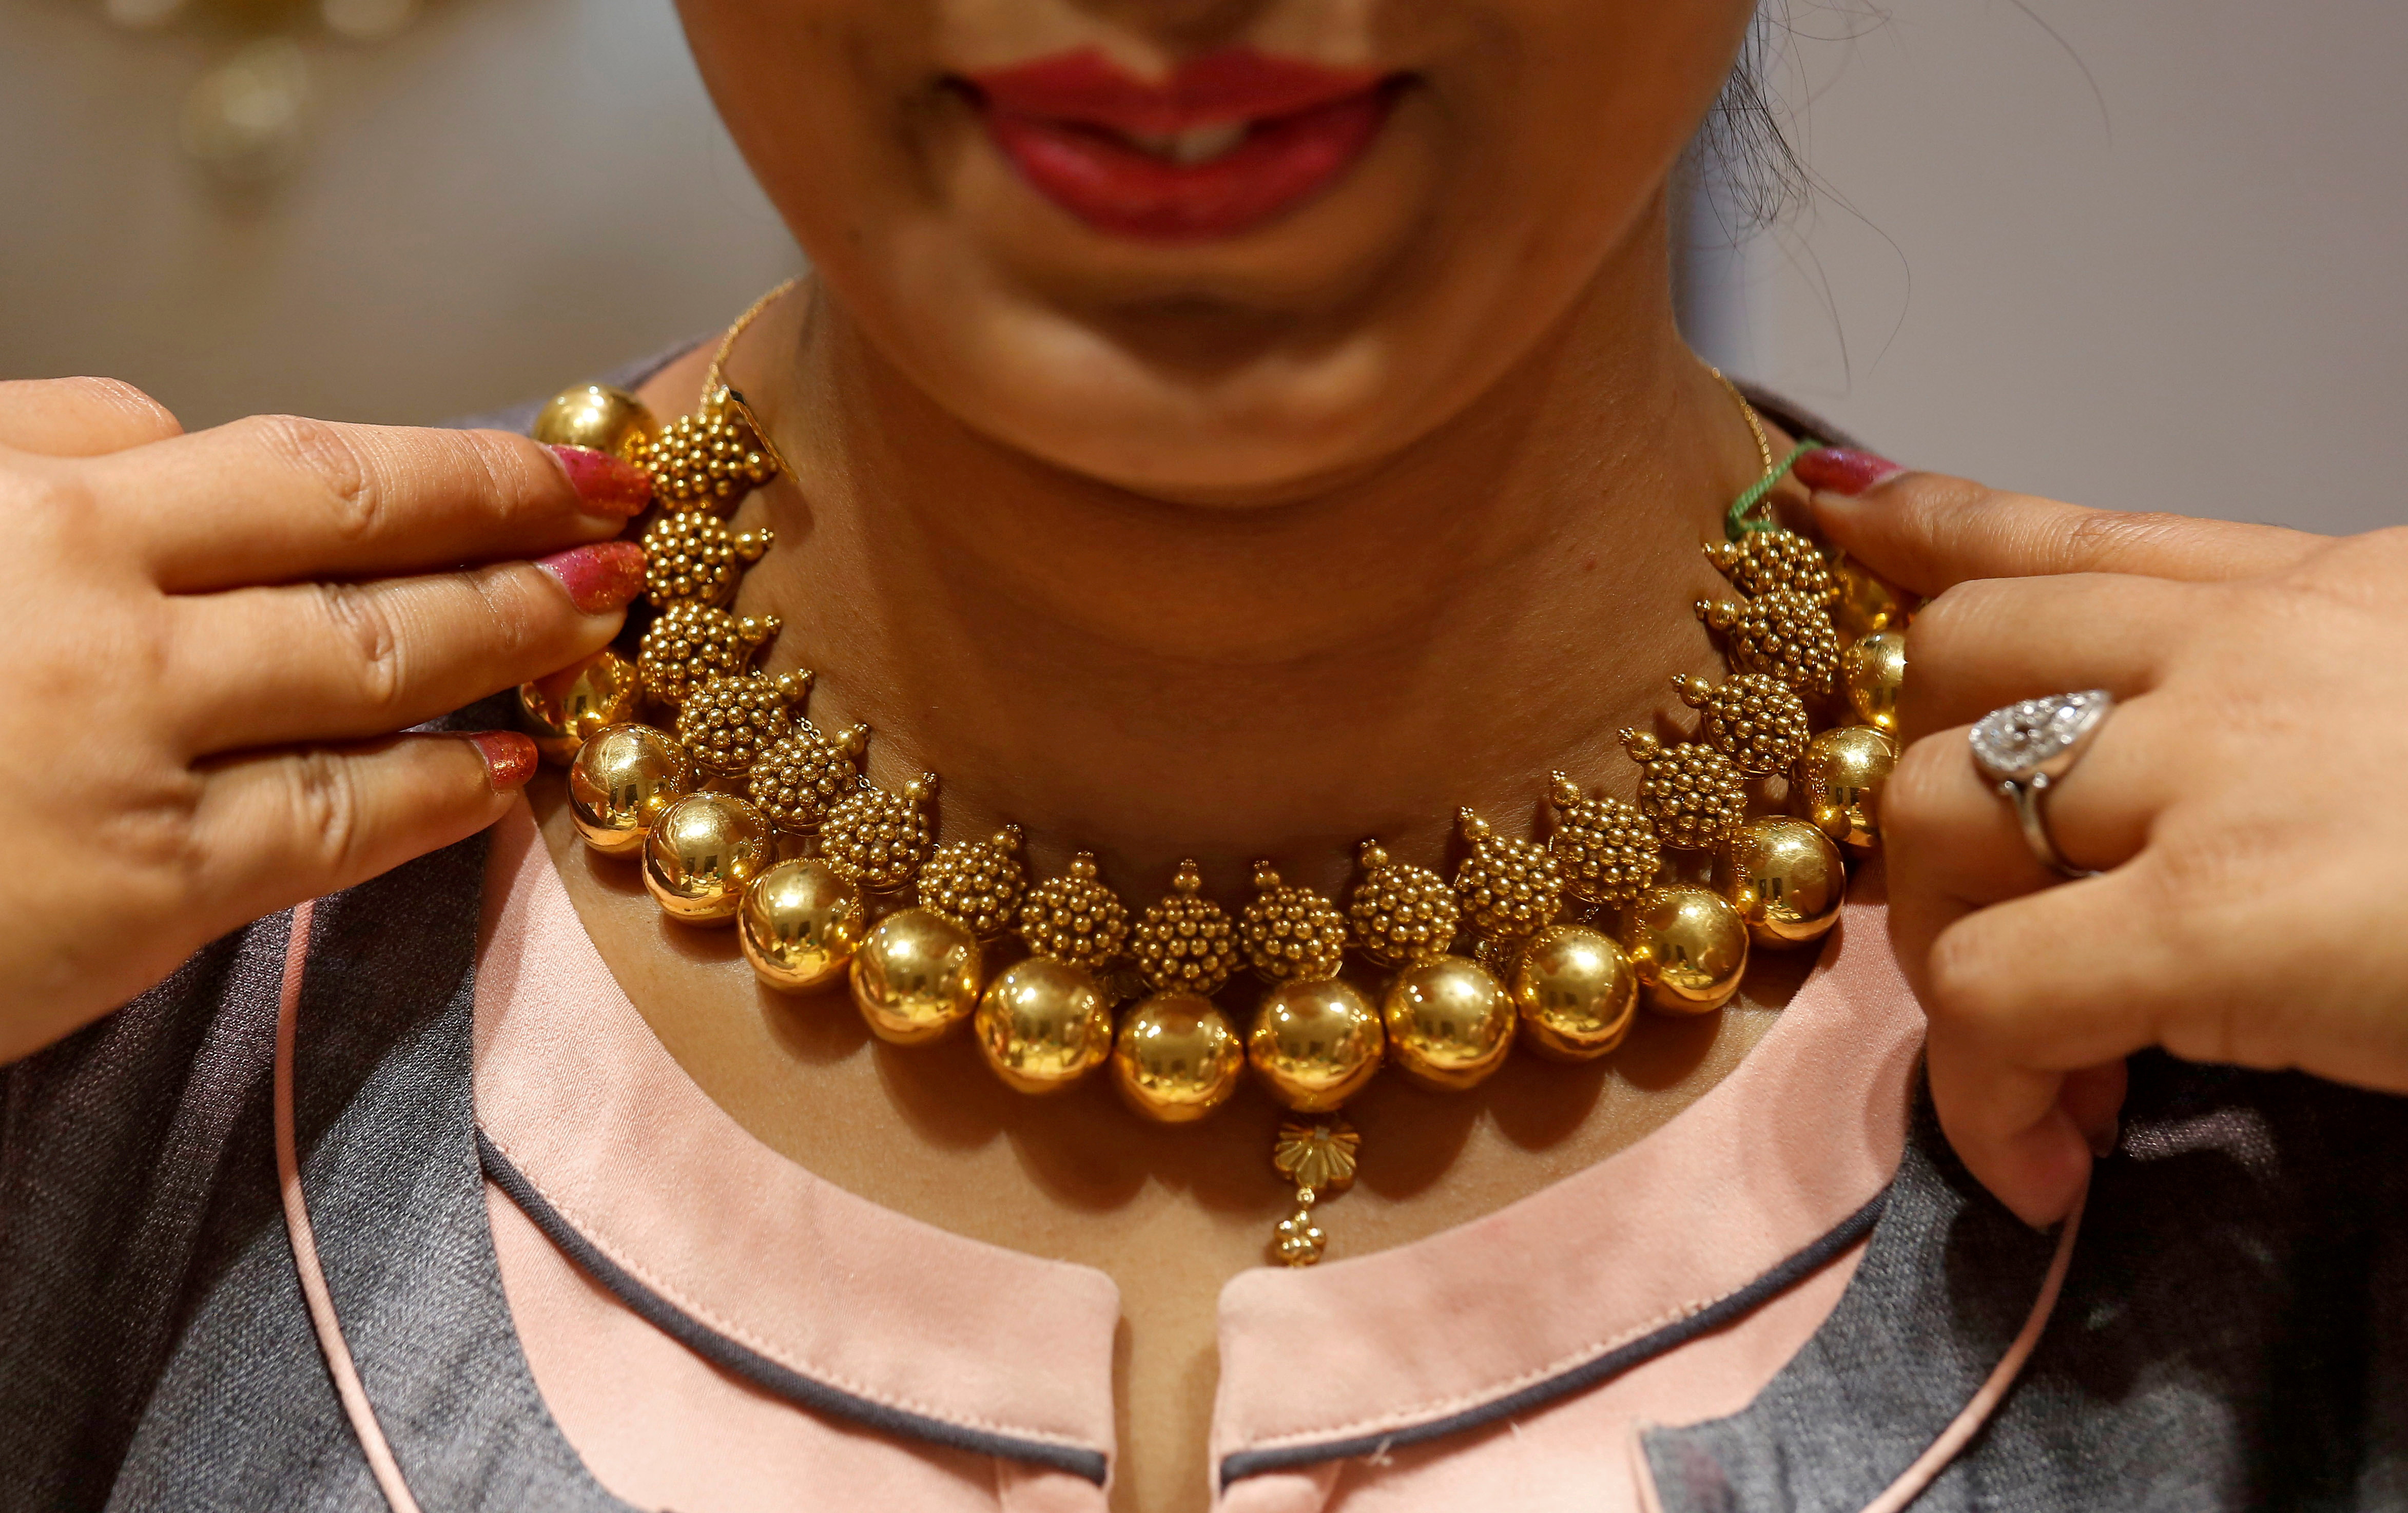 A saleswoman displays a gold necklace to a customer inside a jewellery showroom on the occasion of Akshaya Tritiya, a major gold buying festival, in Mumbai